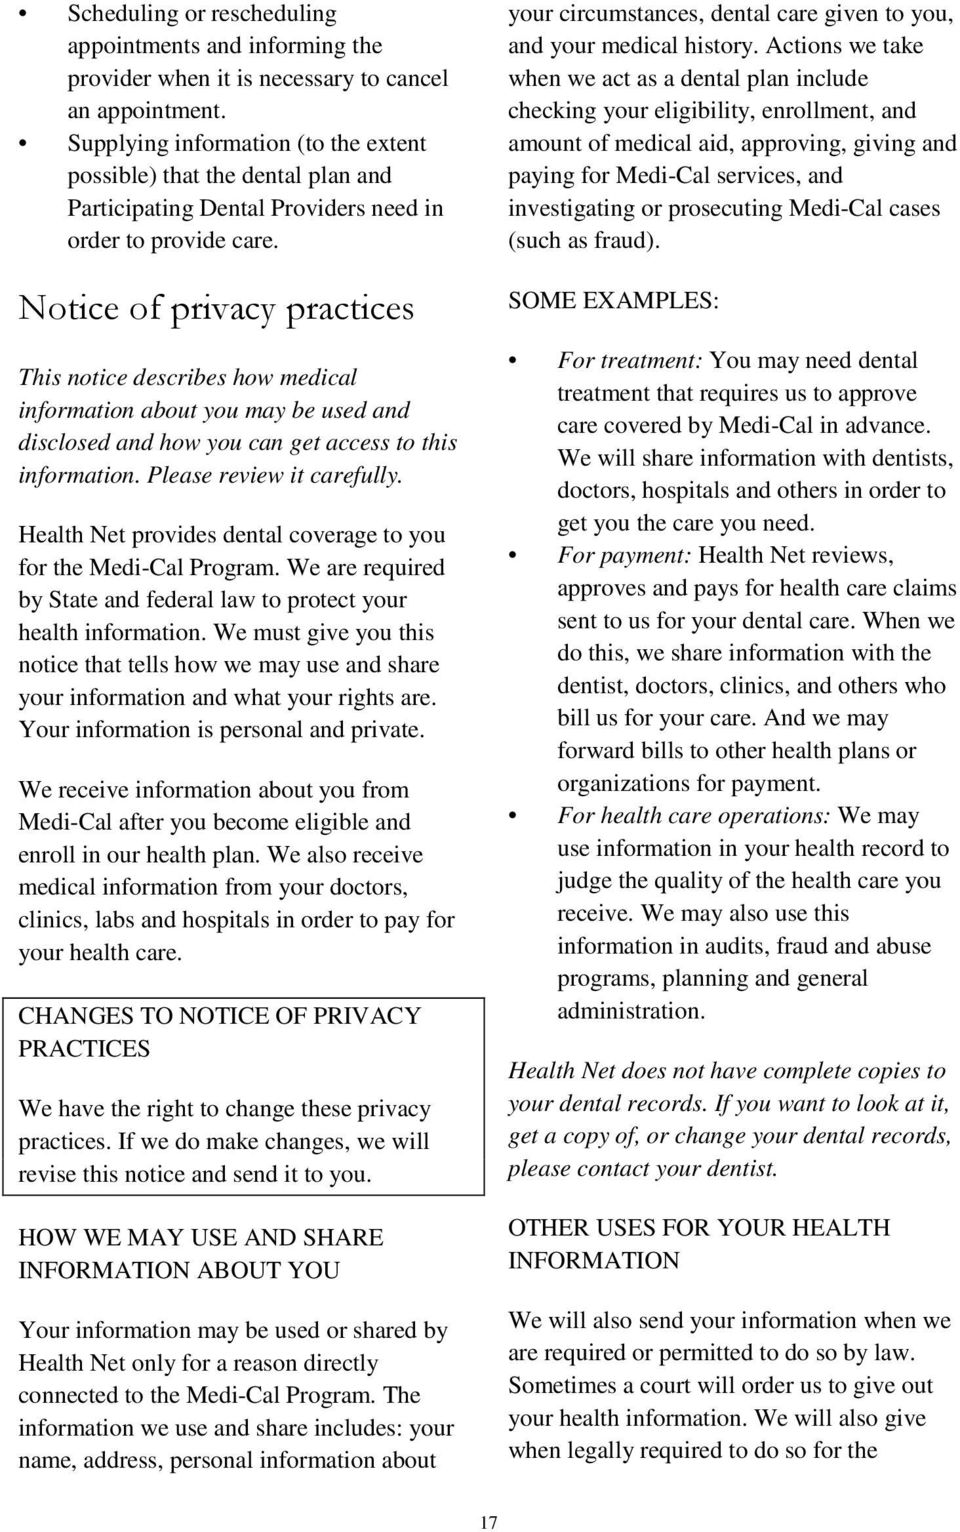 Notice of privacy practices This notice describes how medical information about you may be used and disclosed and how you can get access to this information. Please review it carefully.